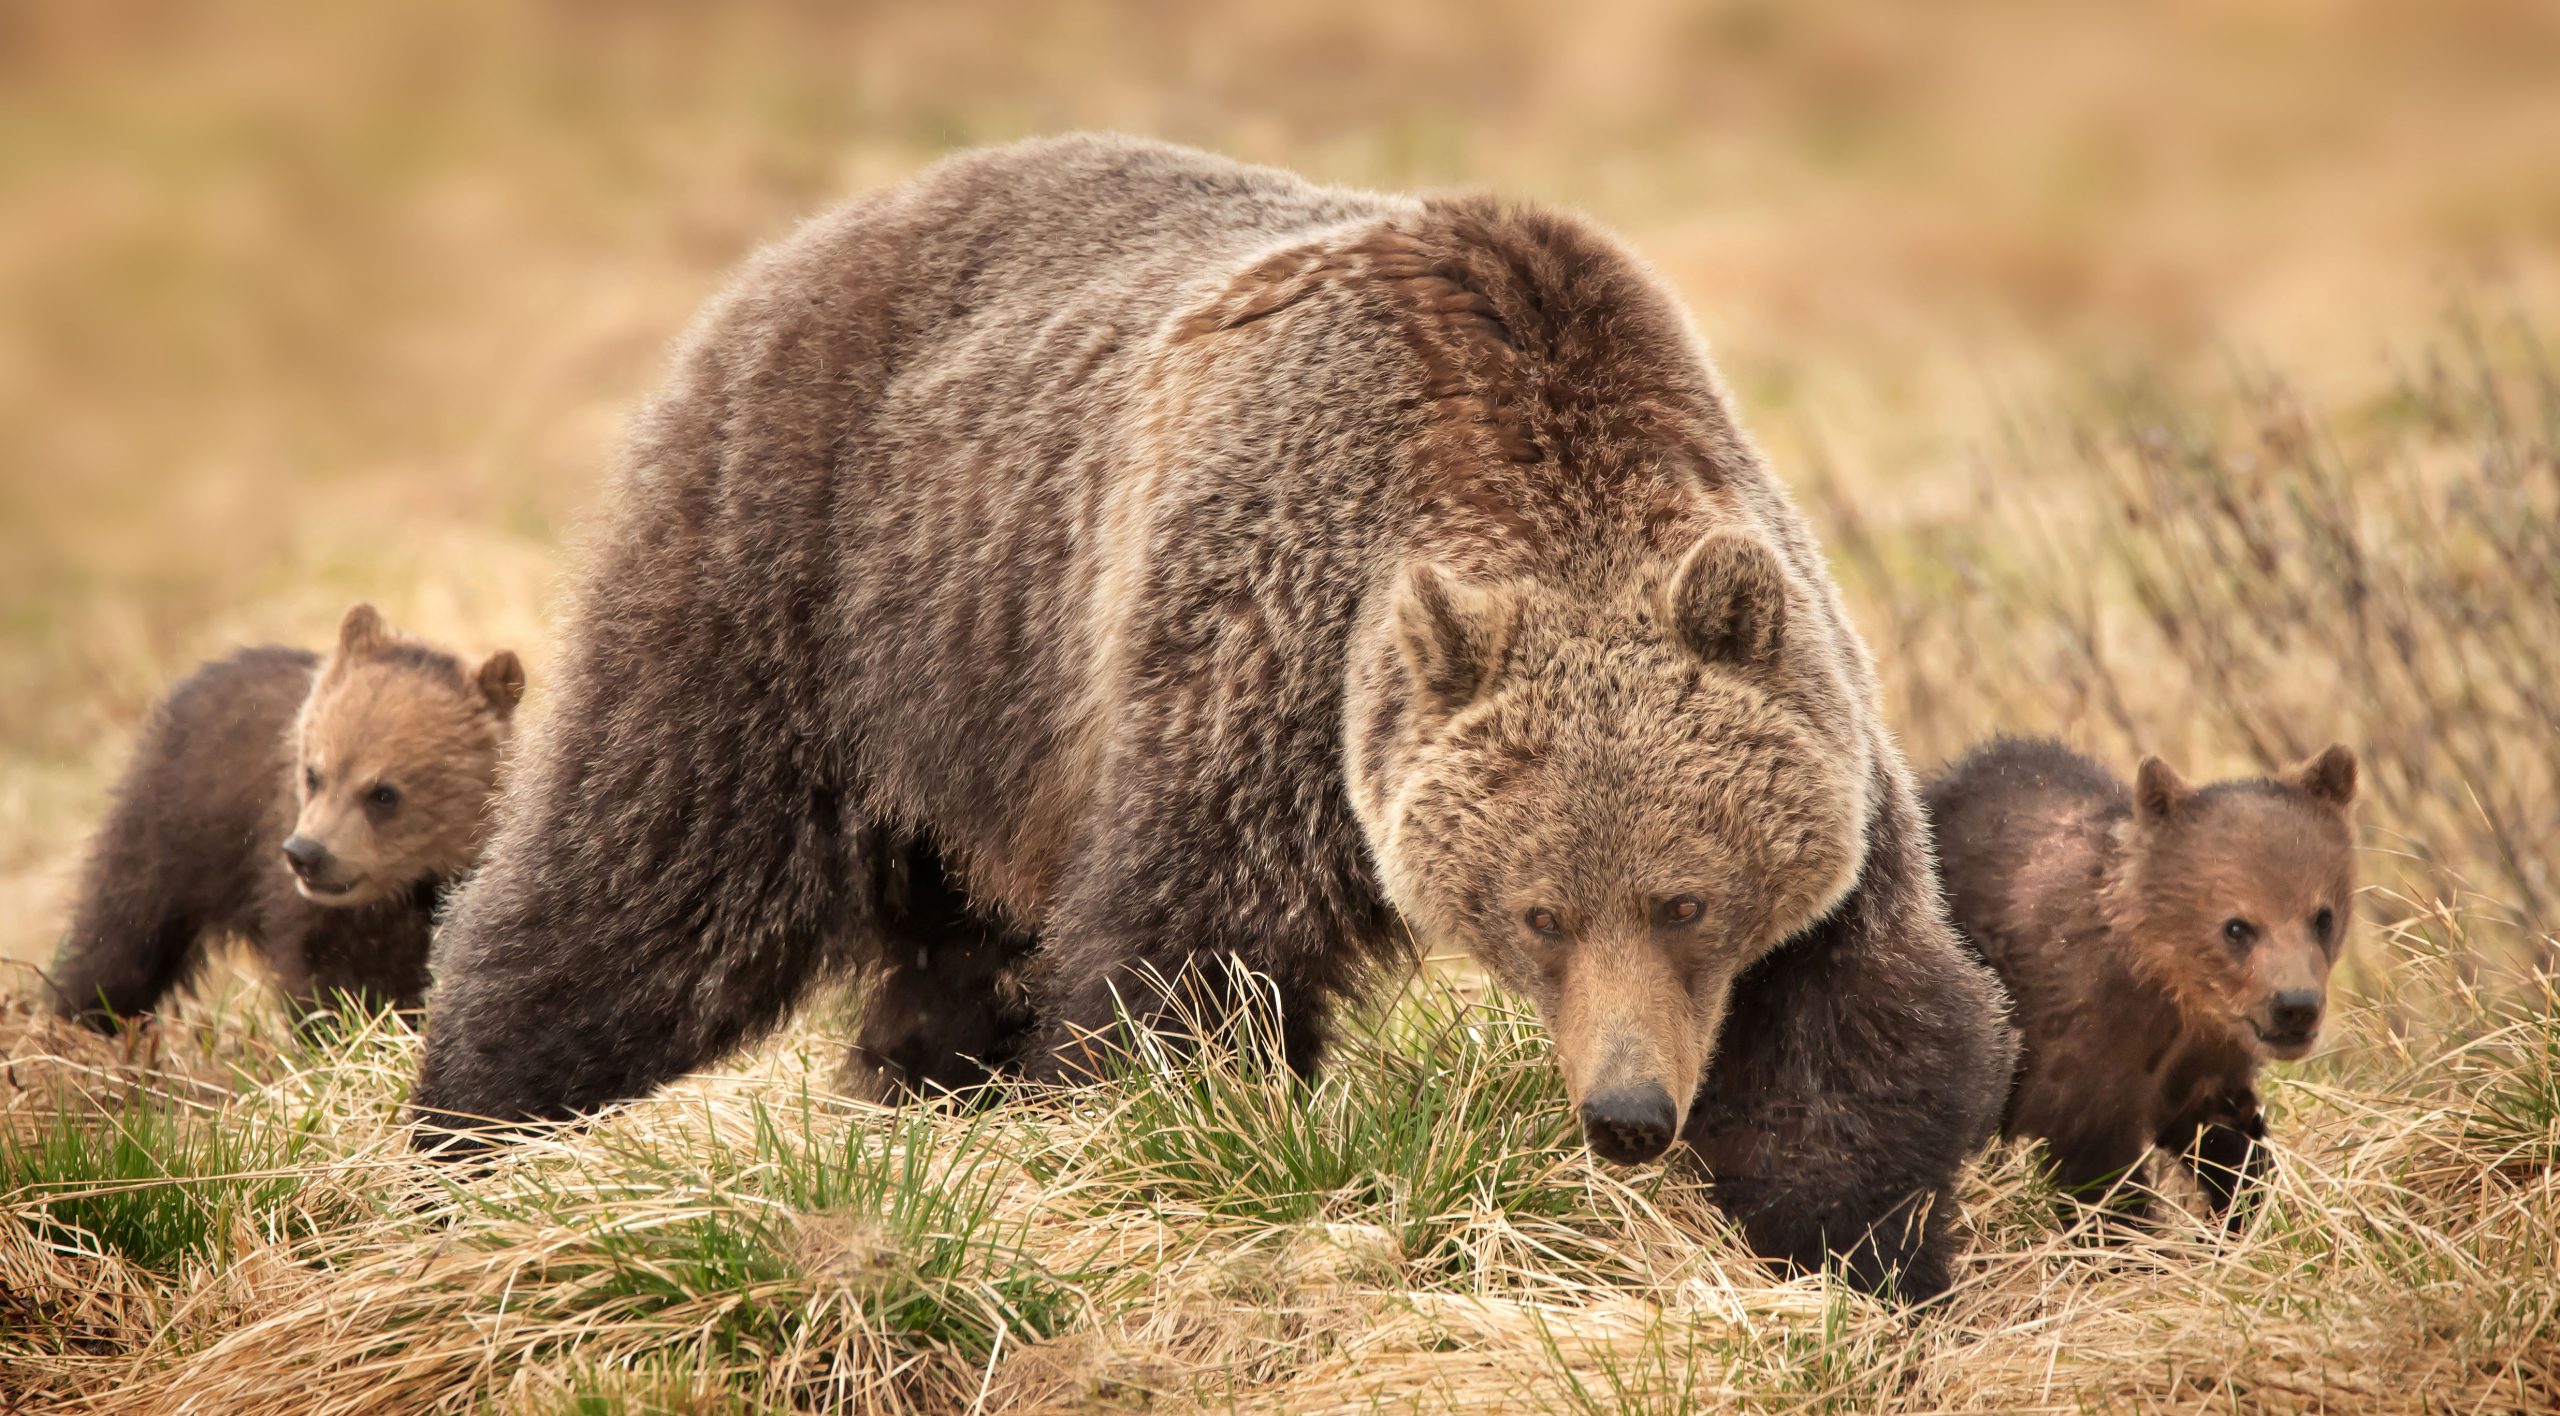 Grizzly with cubs by Rick Price